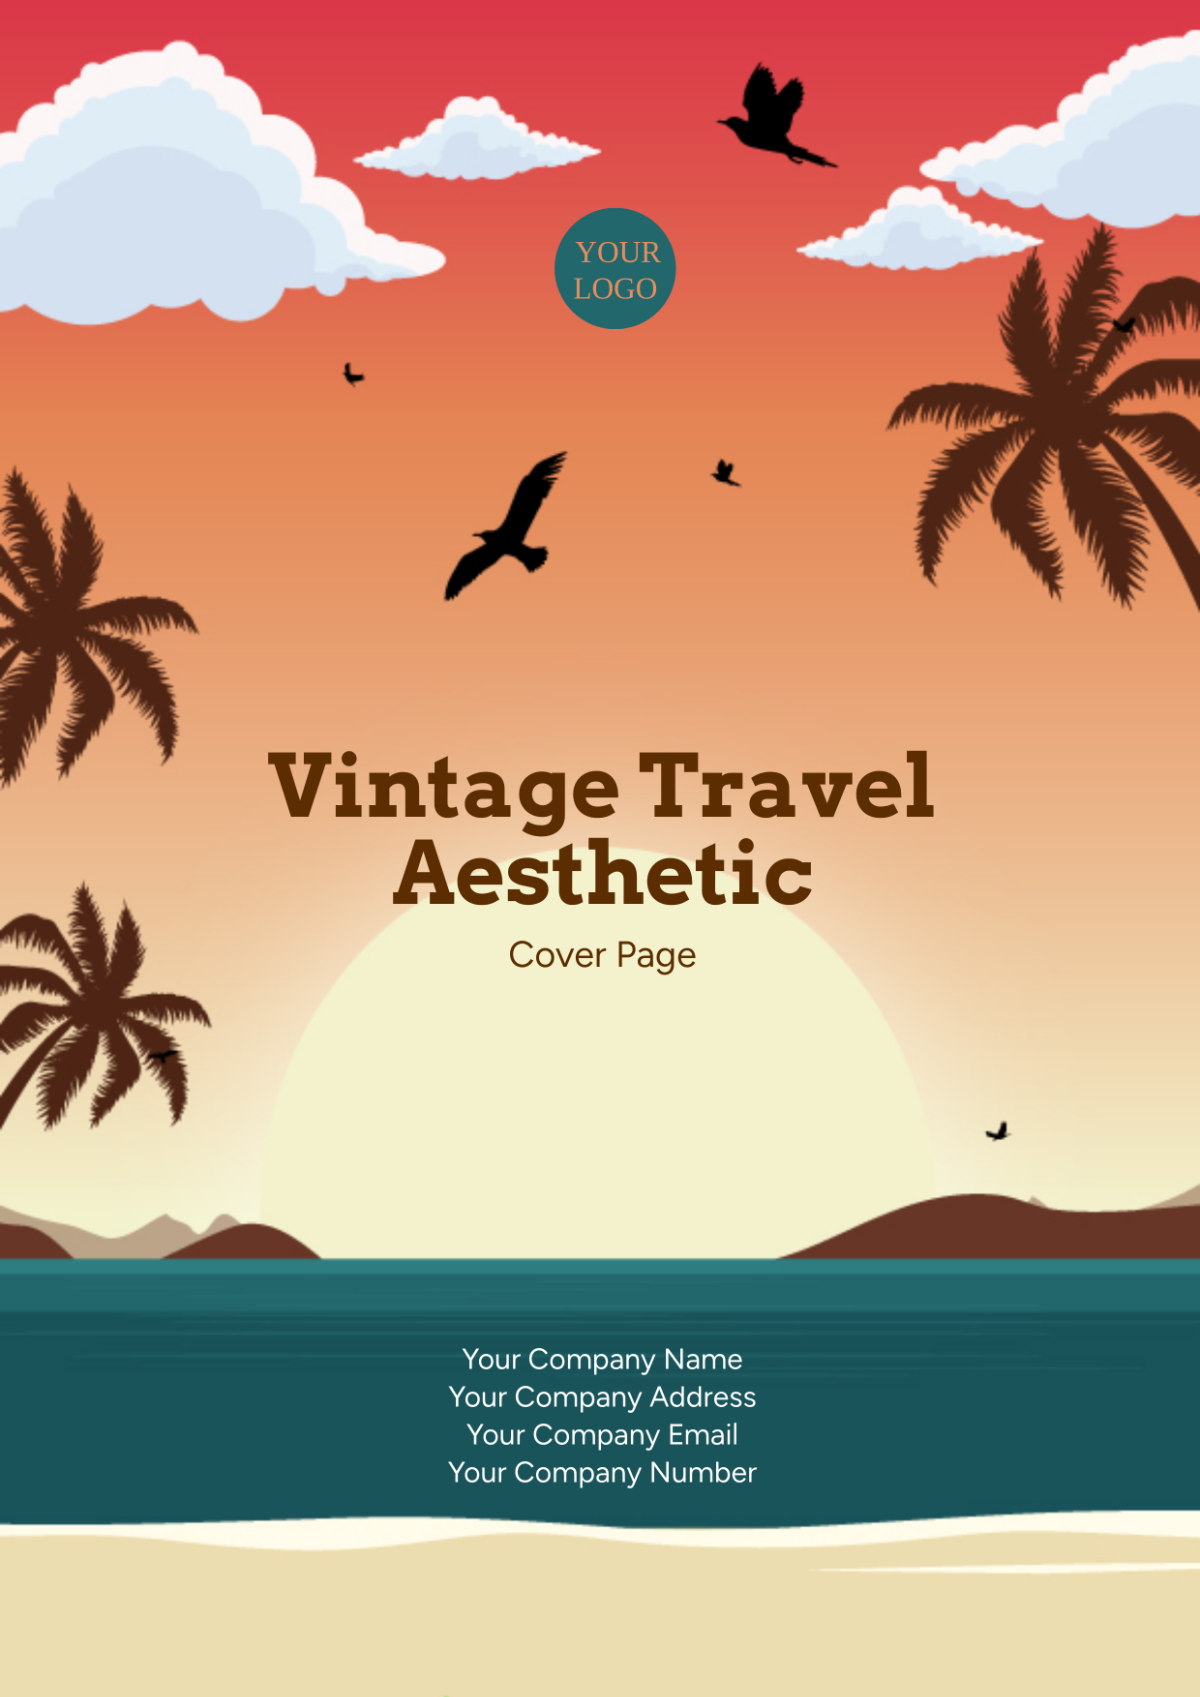 Vintage Travel Aesthetic Cover Page